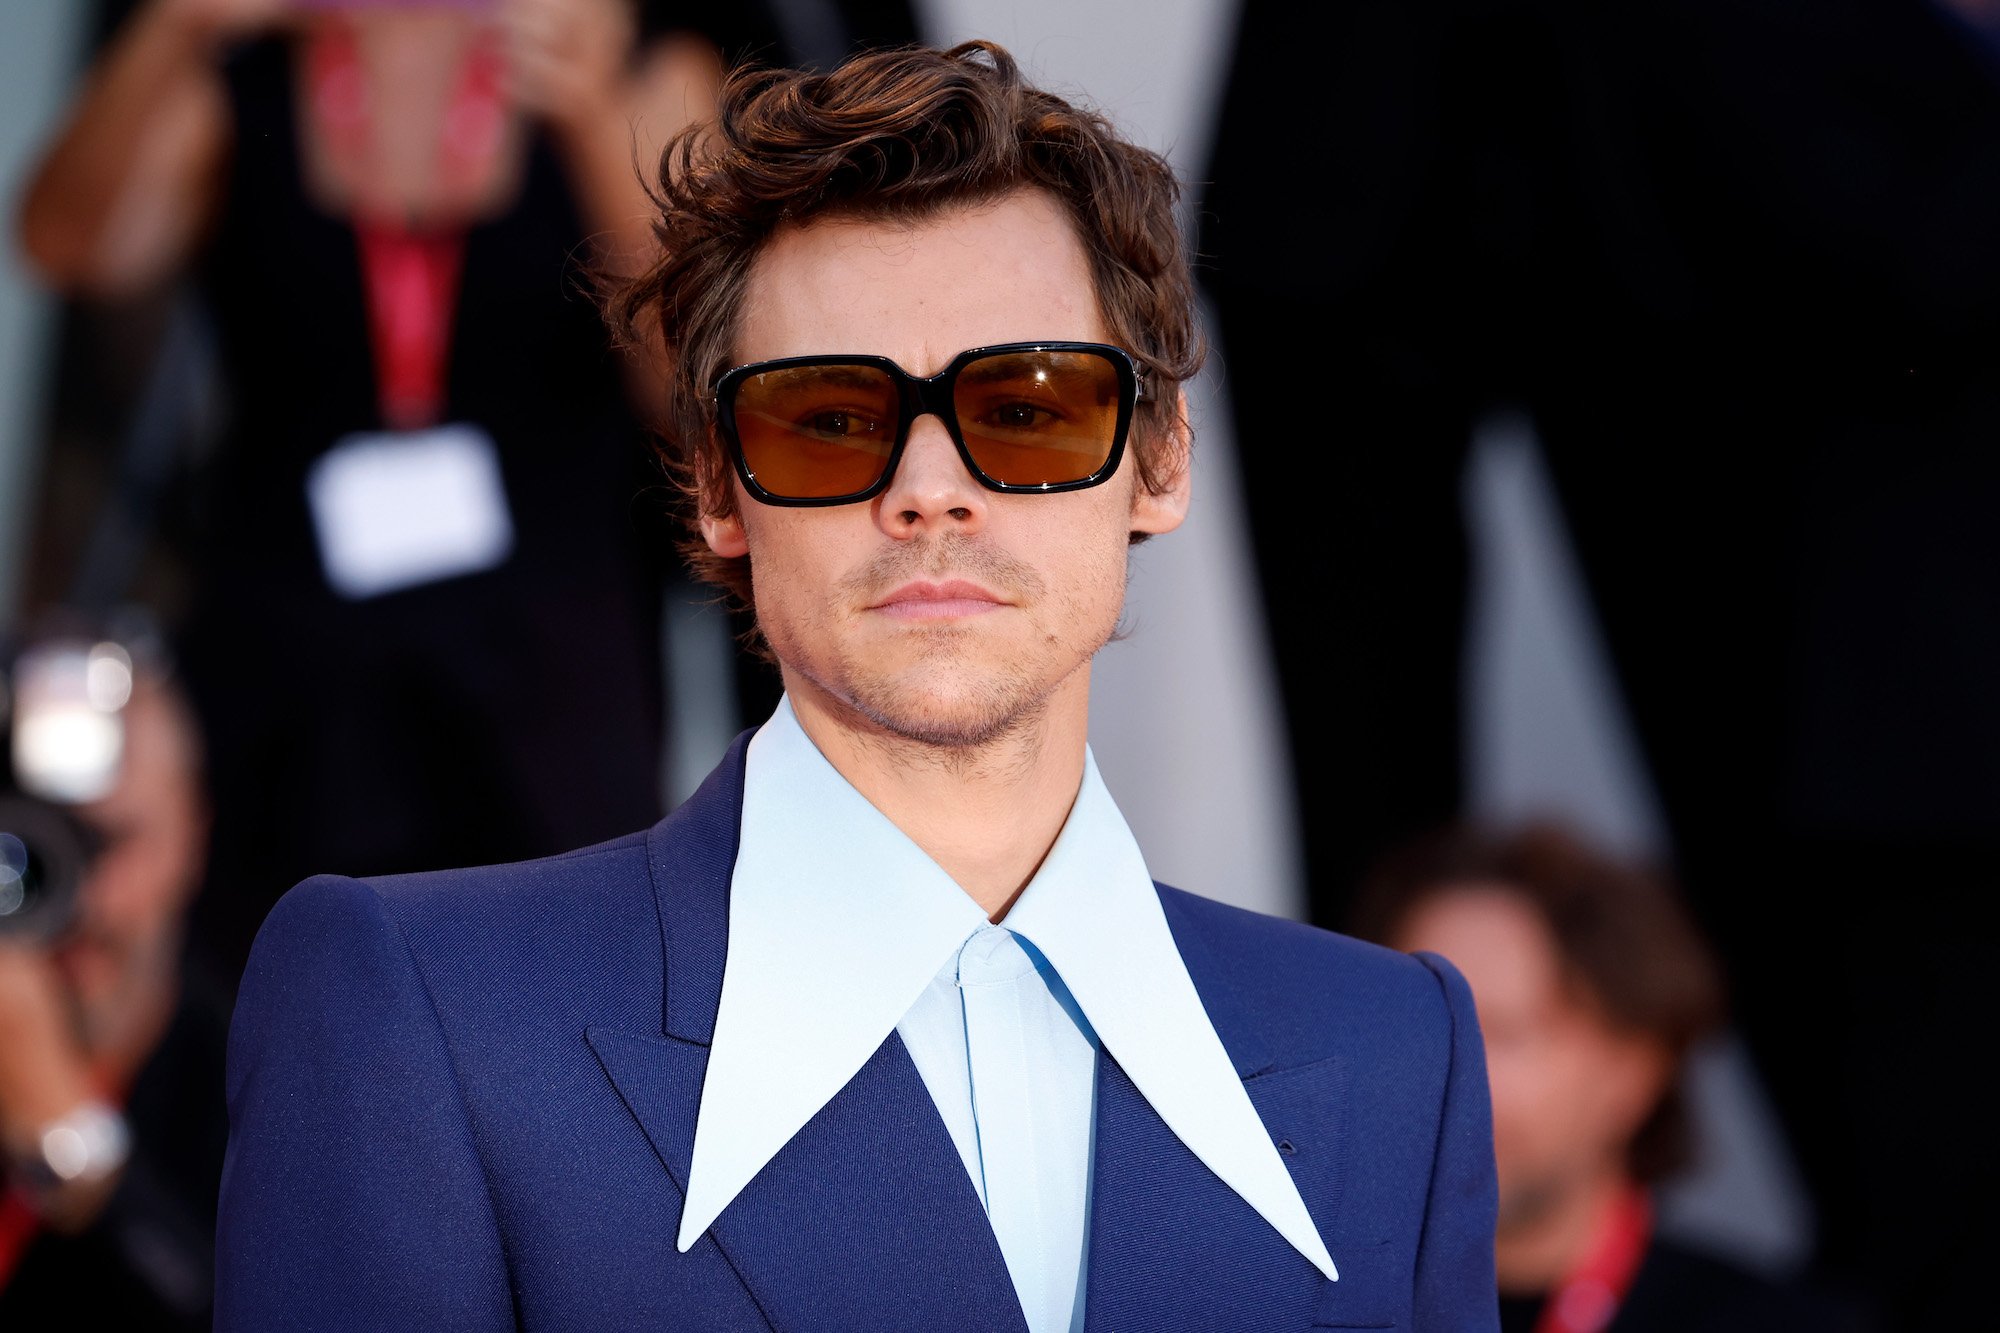 Harry Styles, who switched to acting, wears blue.